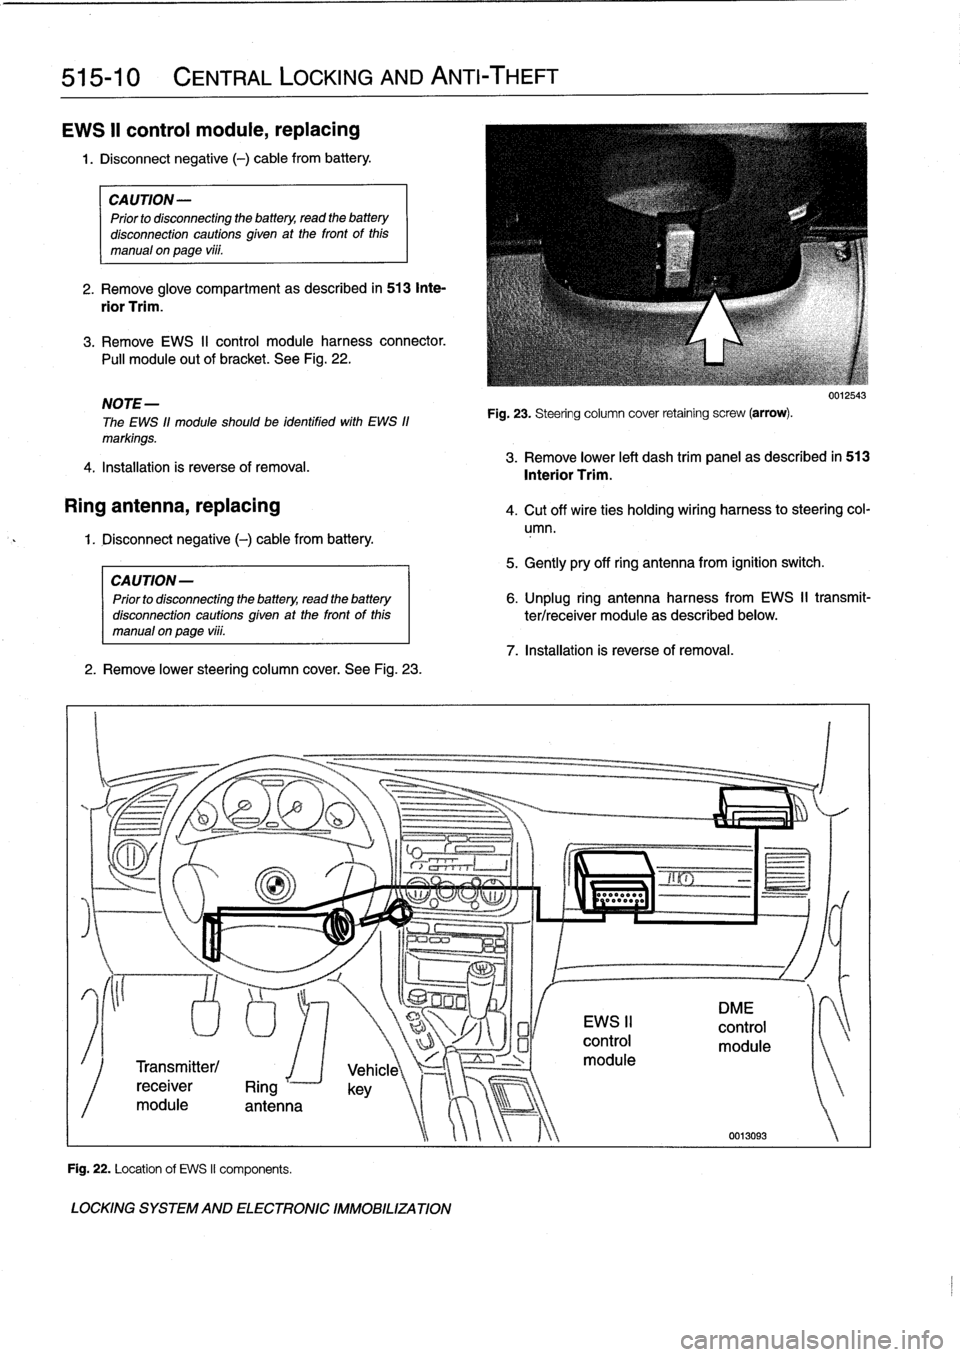 BMW M3 1998 E36 Workshop Manual 
515-10

	

CENTRAL
LOCKING
AND
ANTI-THEFT

EWS
II
control
module,
replacing

1
.
Disconnect
negative
(-)
cable
from
battery
.

CAUTION-

Prior
to
disconnecting
the
battery,
read
the
battery

disconne